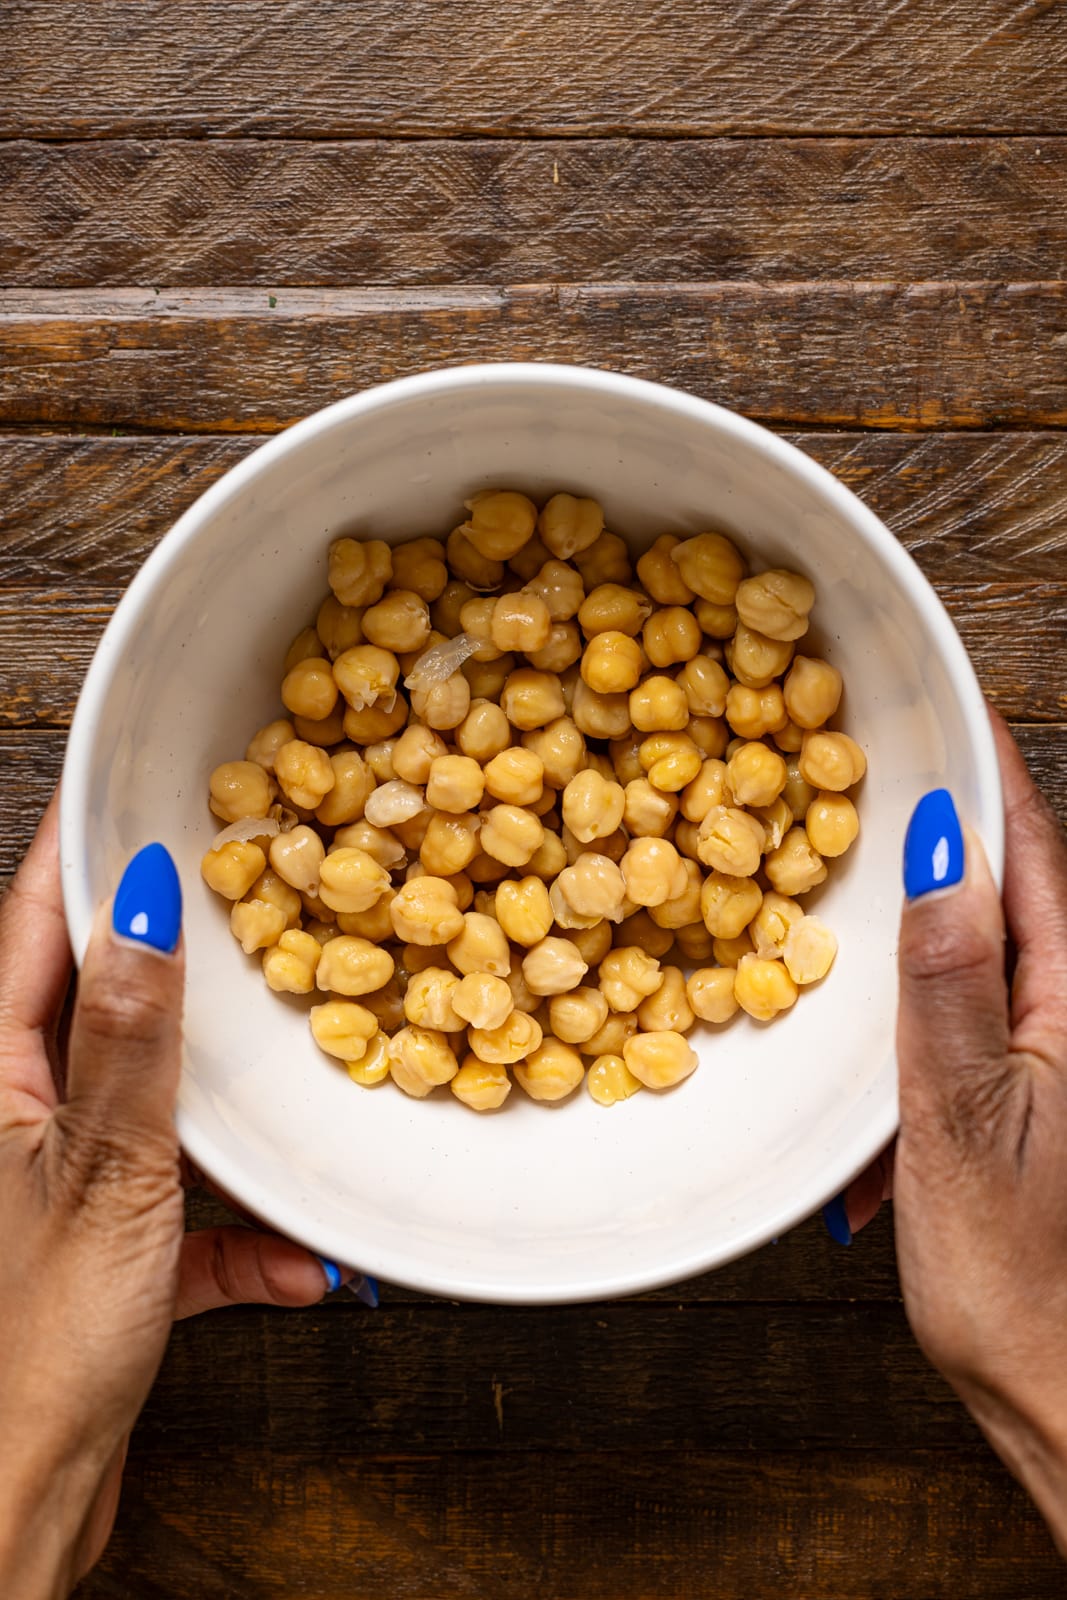 Drained chickpeas in a bowl being held.